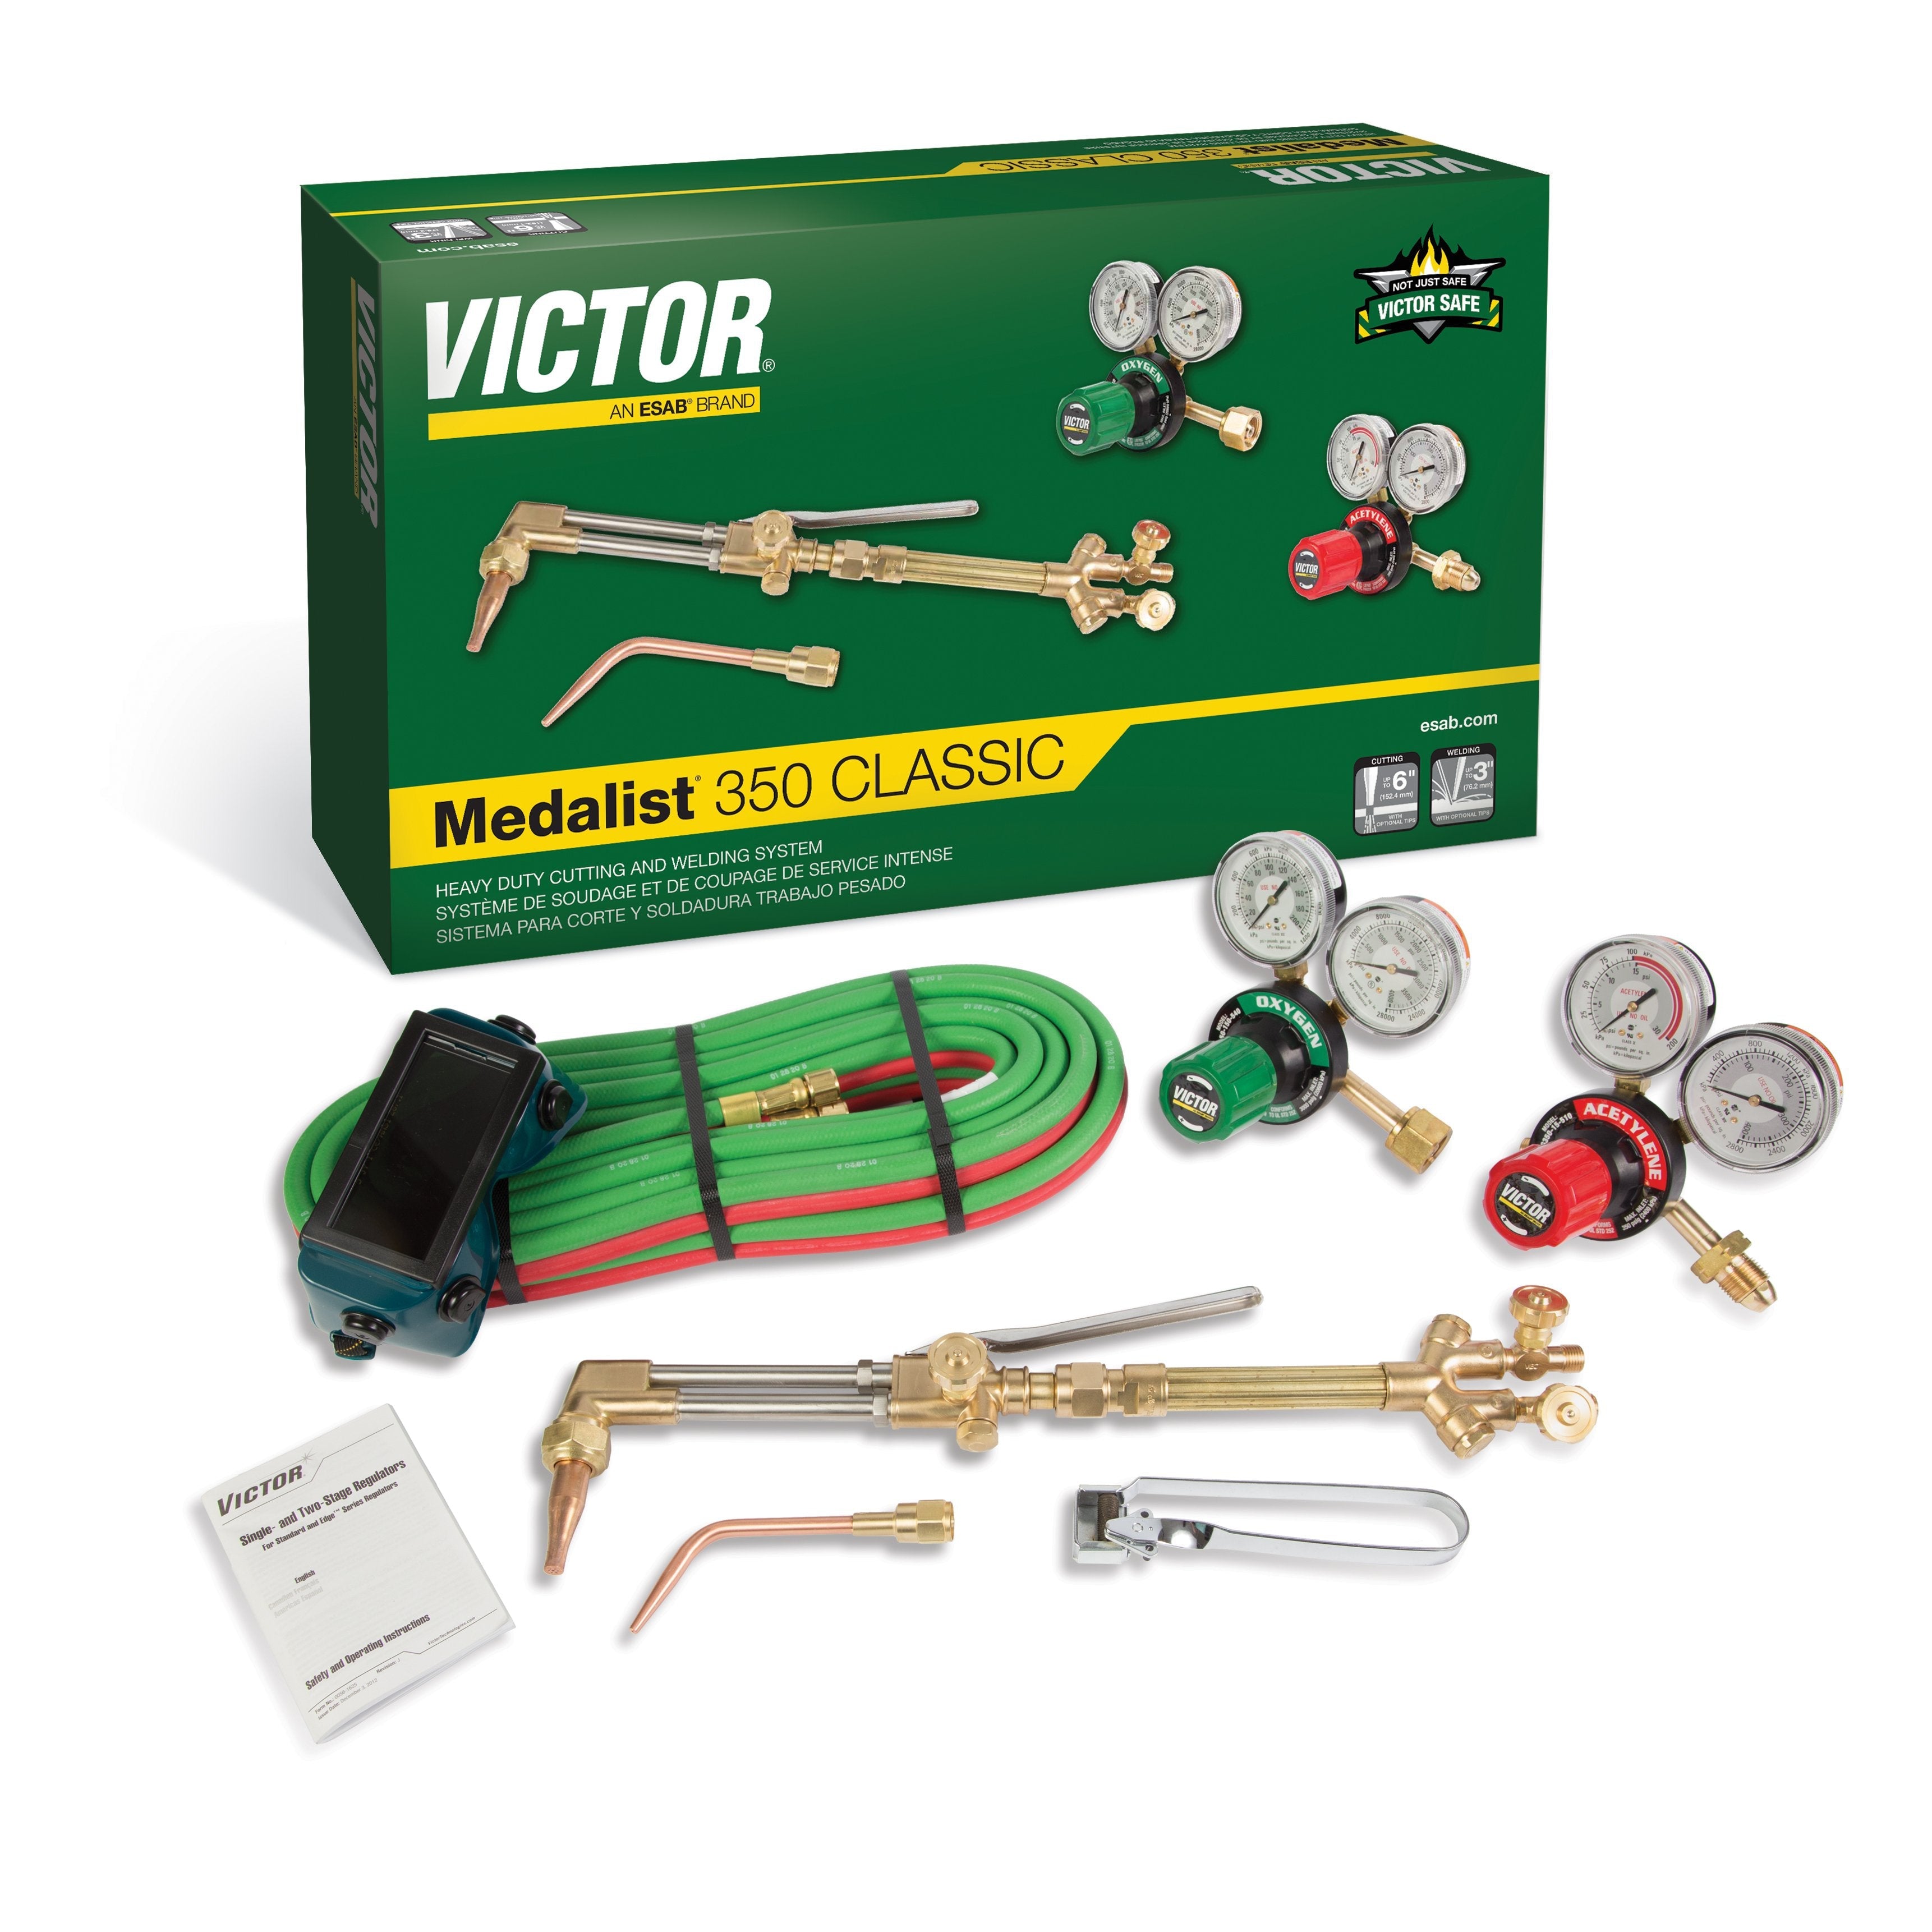 Victor Medalist G350 Classic HD Outfit, CGA 540/510 - 0384-2698